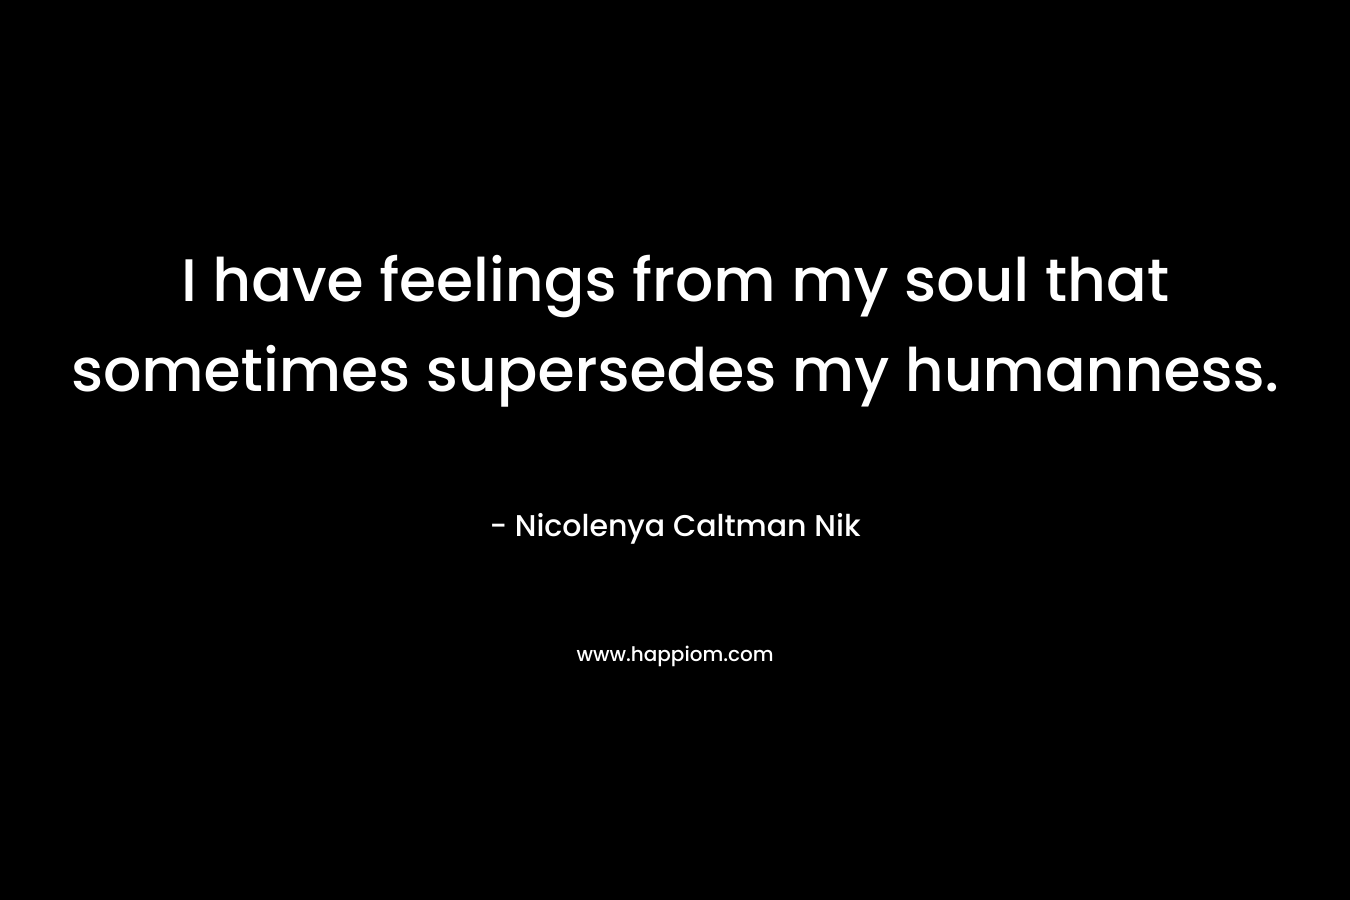 I have feelings from my soul that sometimes supersedes my humanness. – Nicolenya Caltman Nik